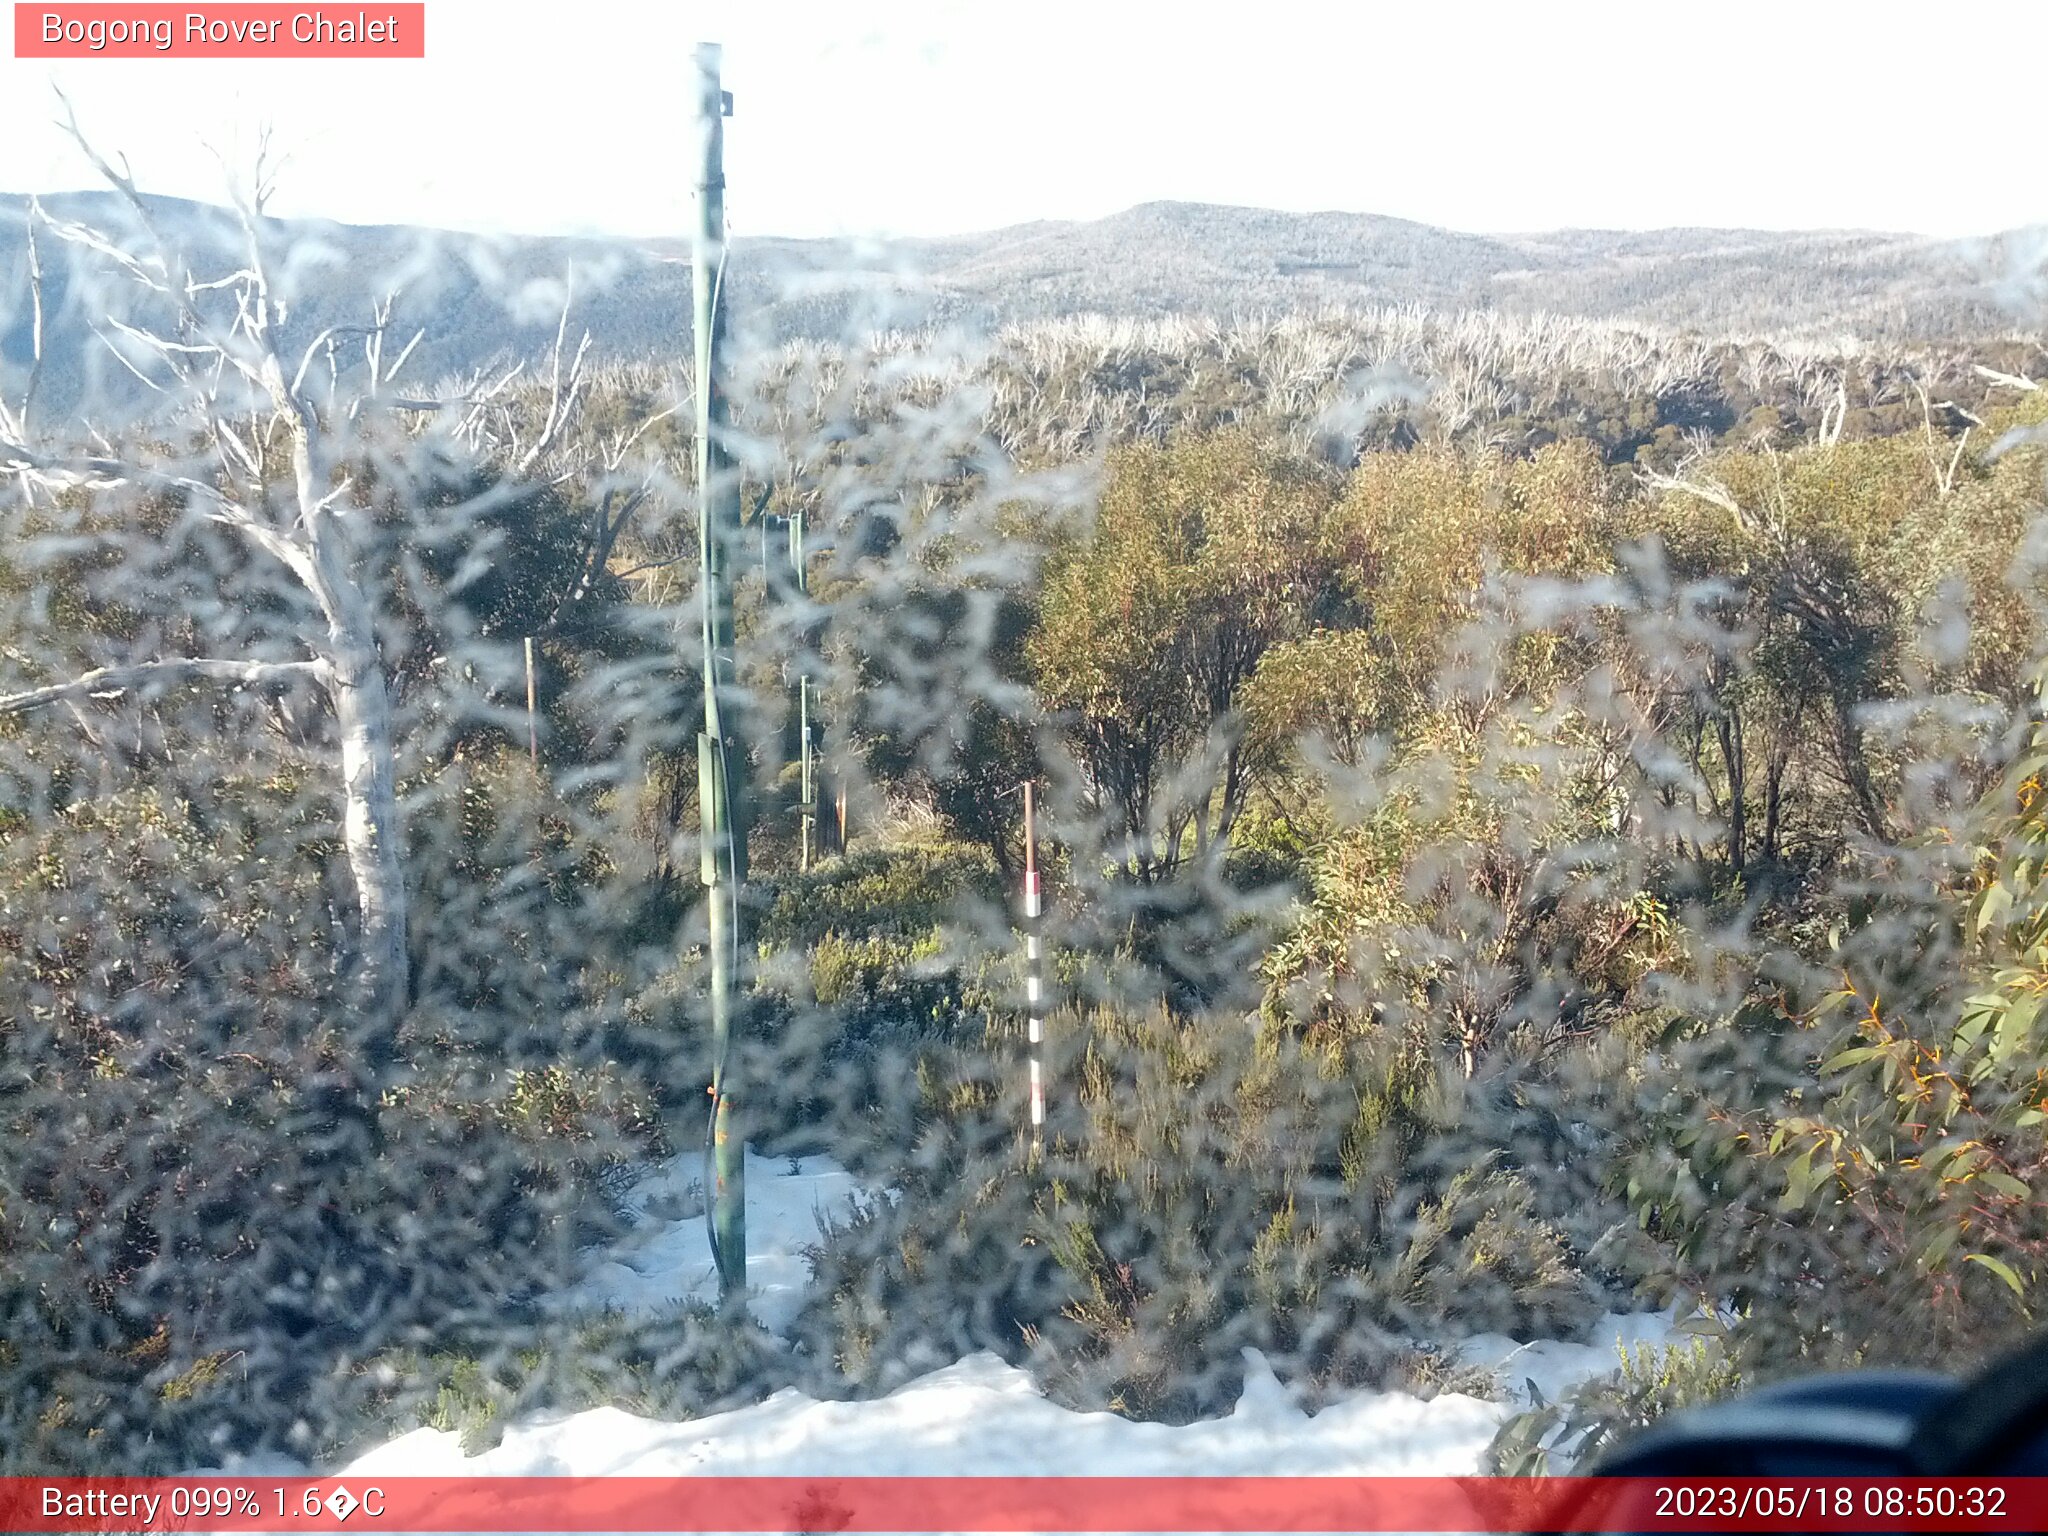 Bogong Web Cam 8:50am Thursday 18th of May 2023